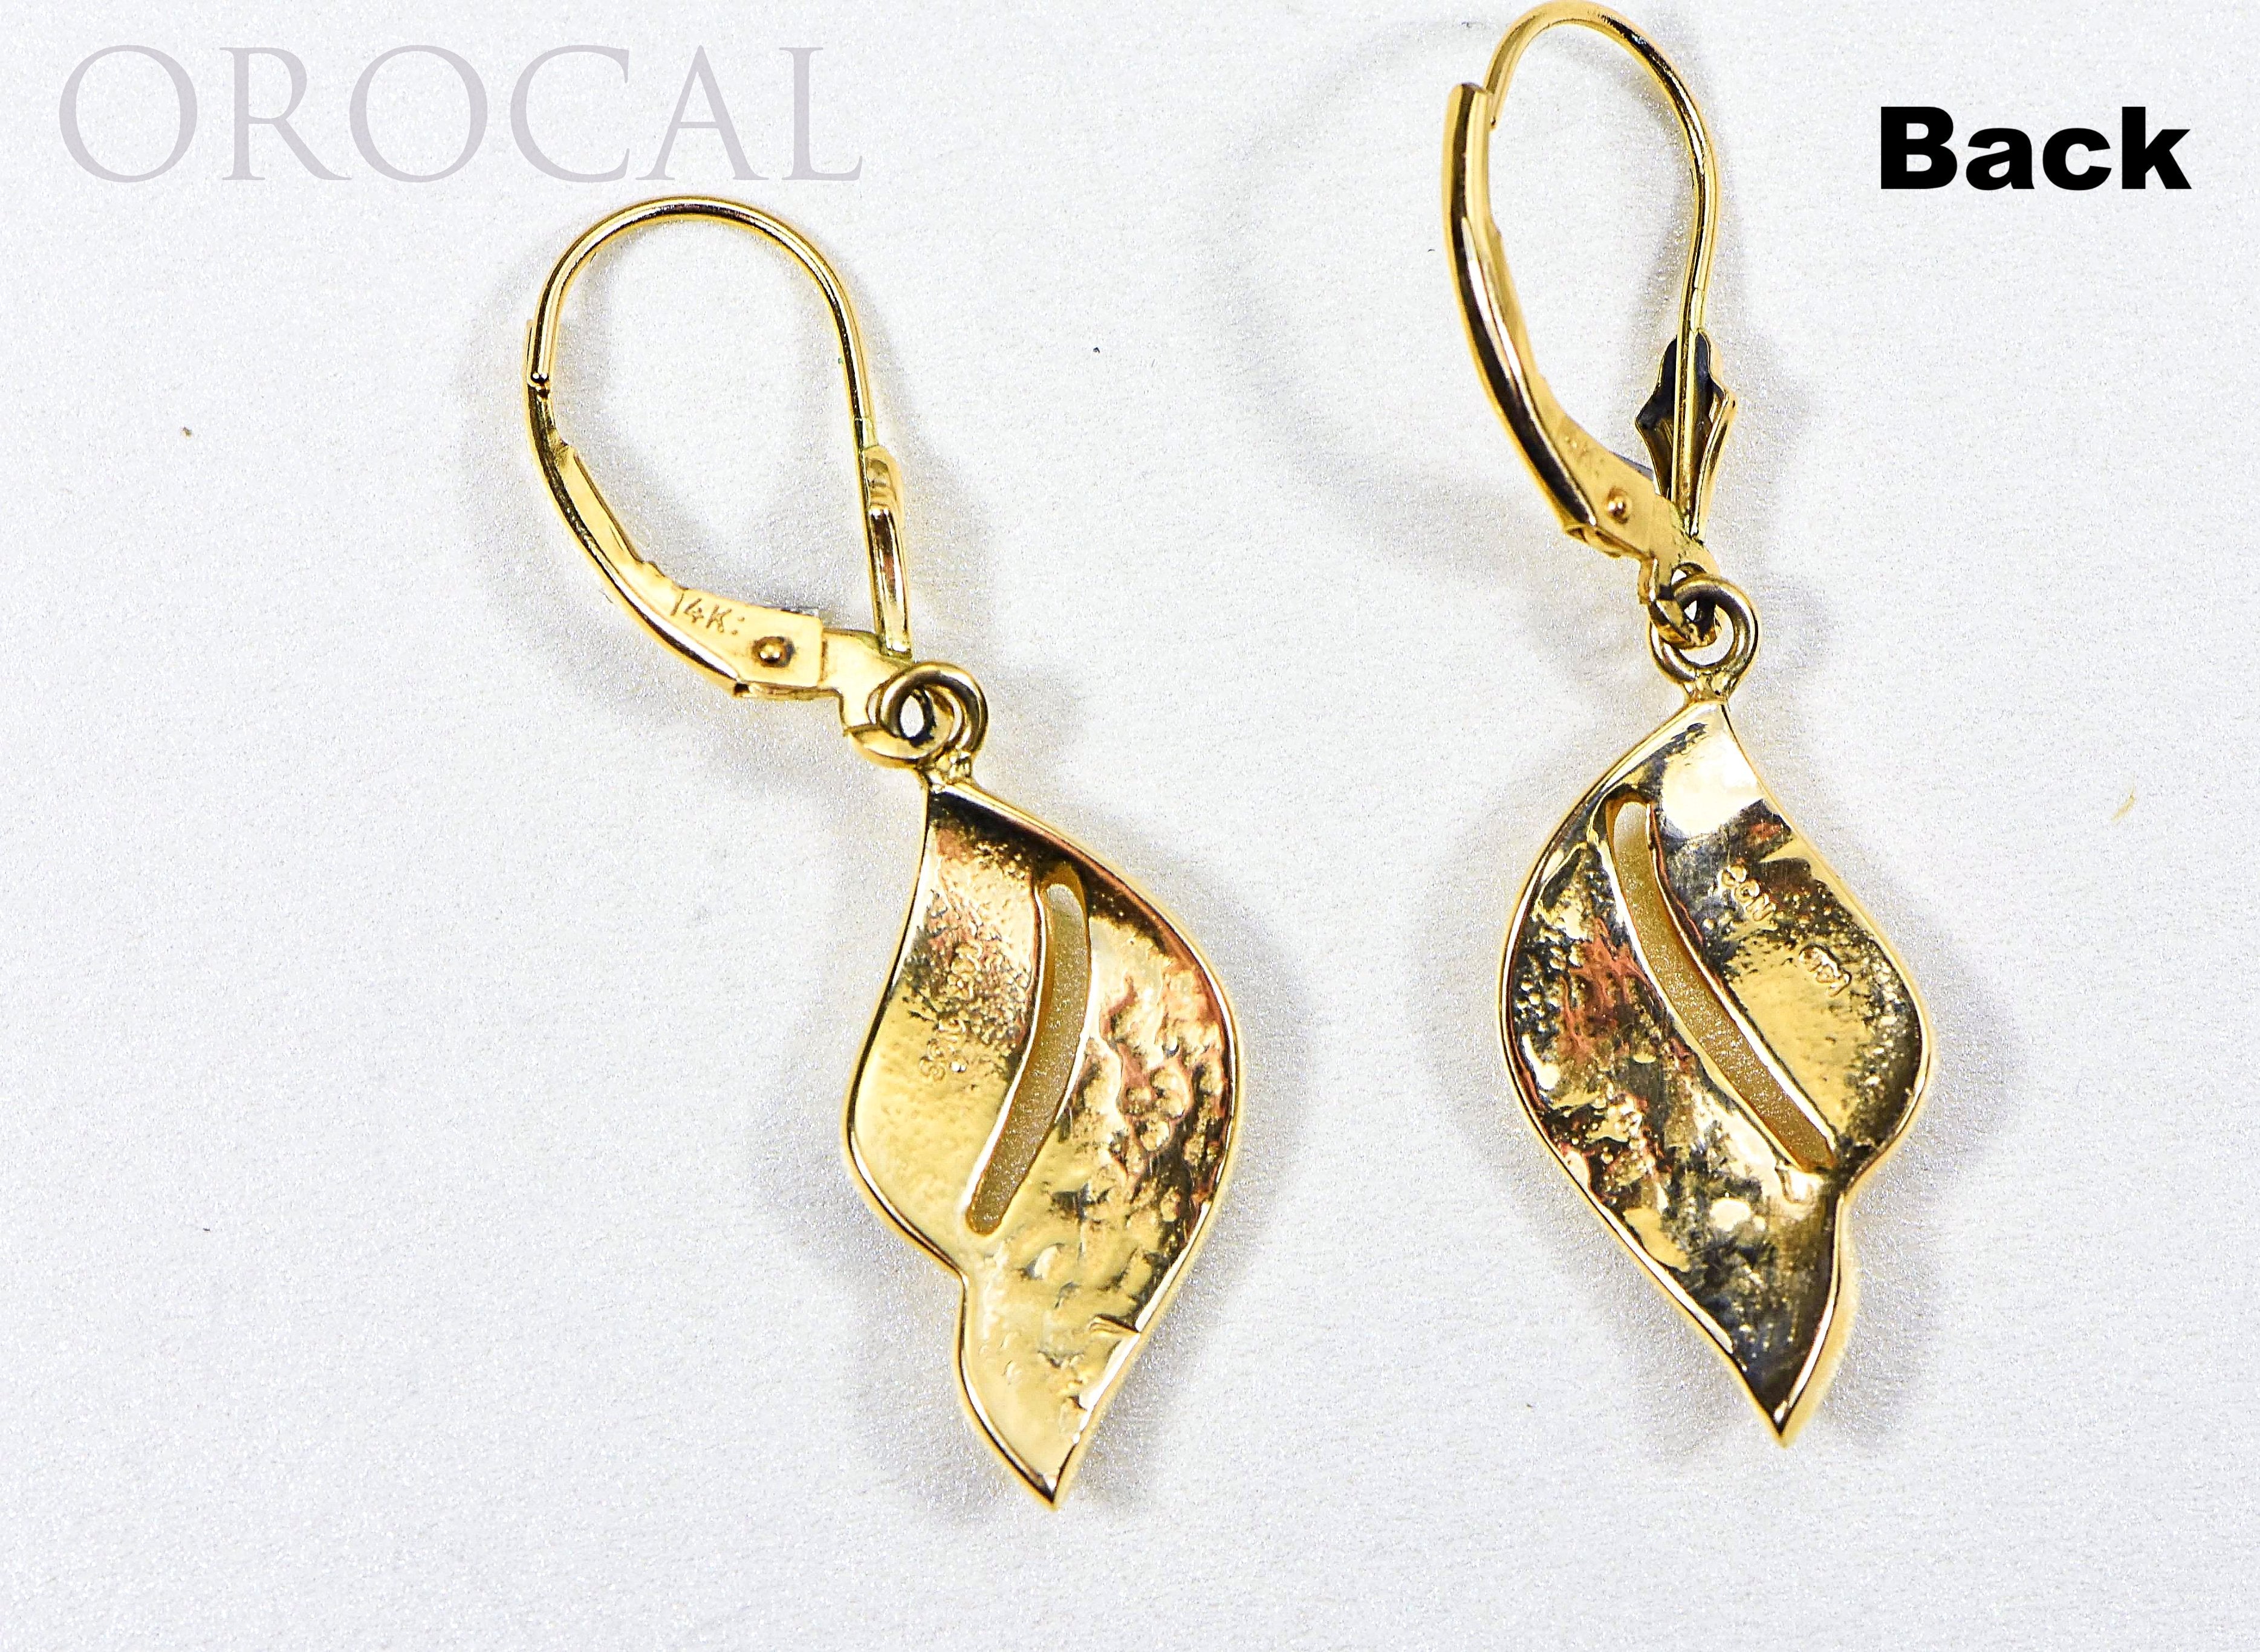 Gold Quartz Earrings "Orocal" EN645Q/LB Genuine Hand Crafted Jewelry - 14K Gold Casting